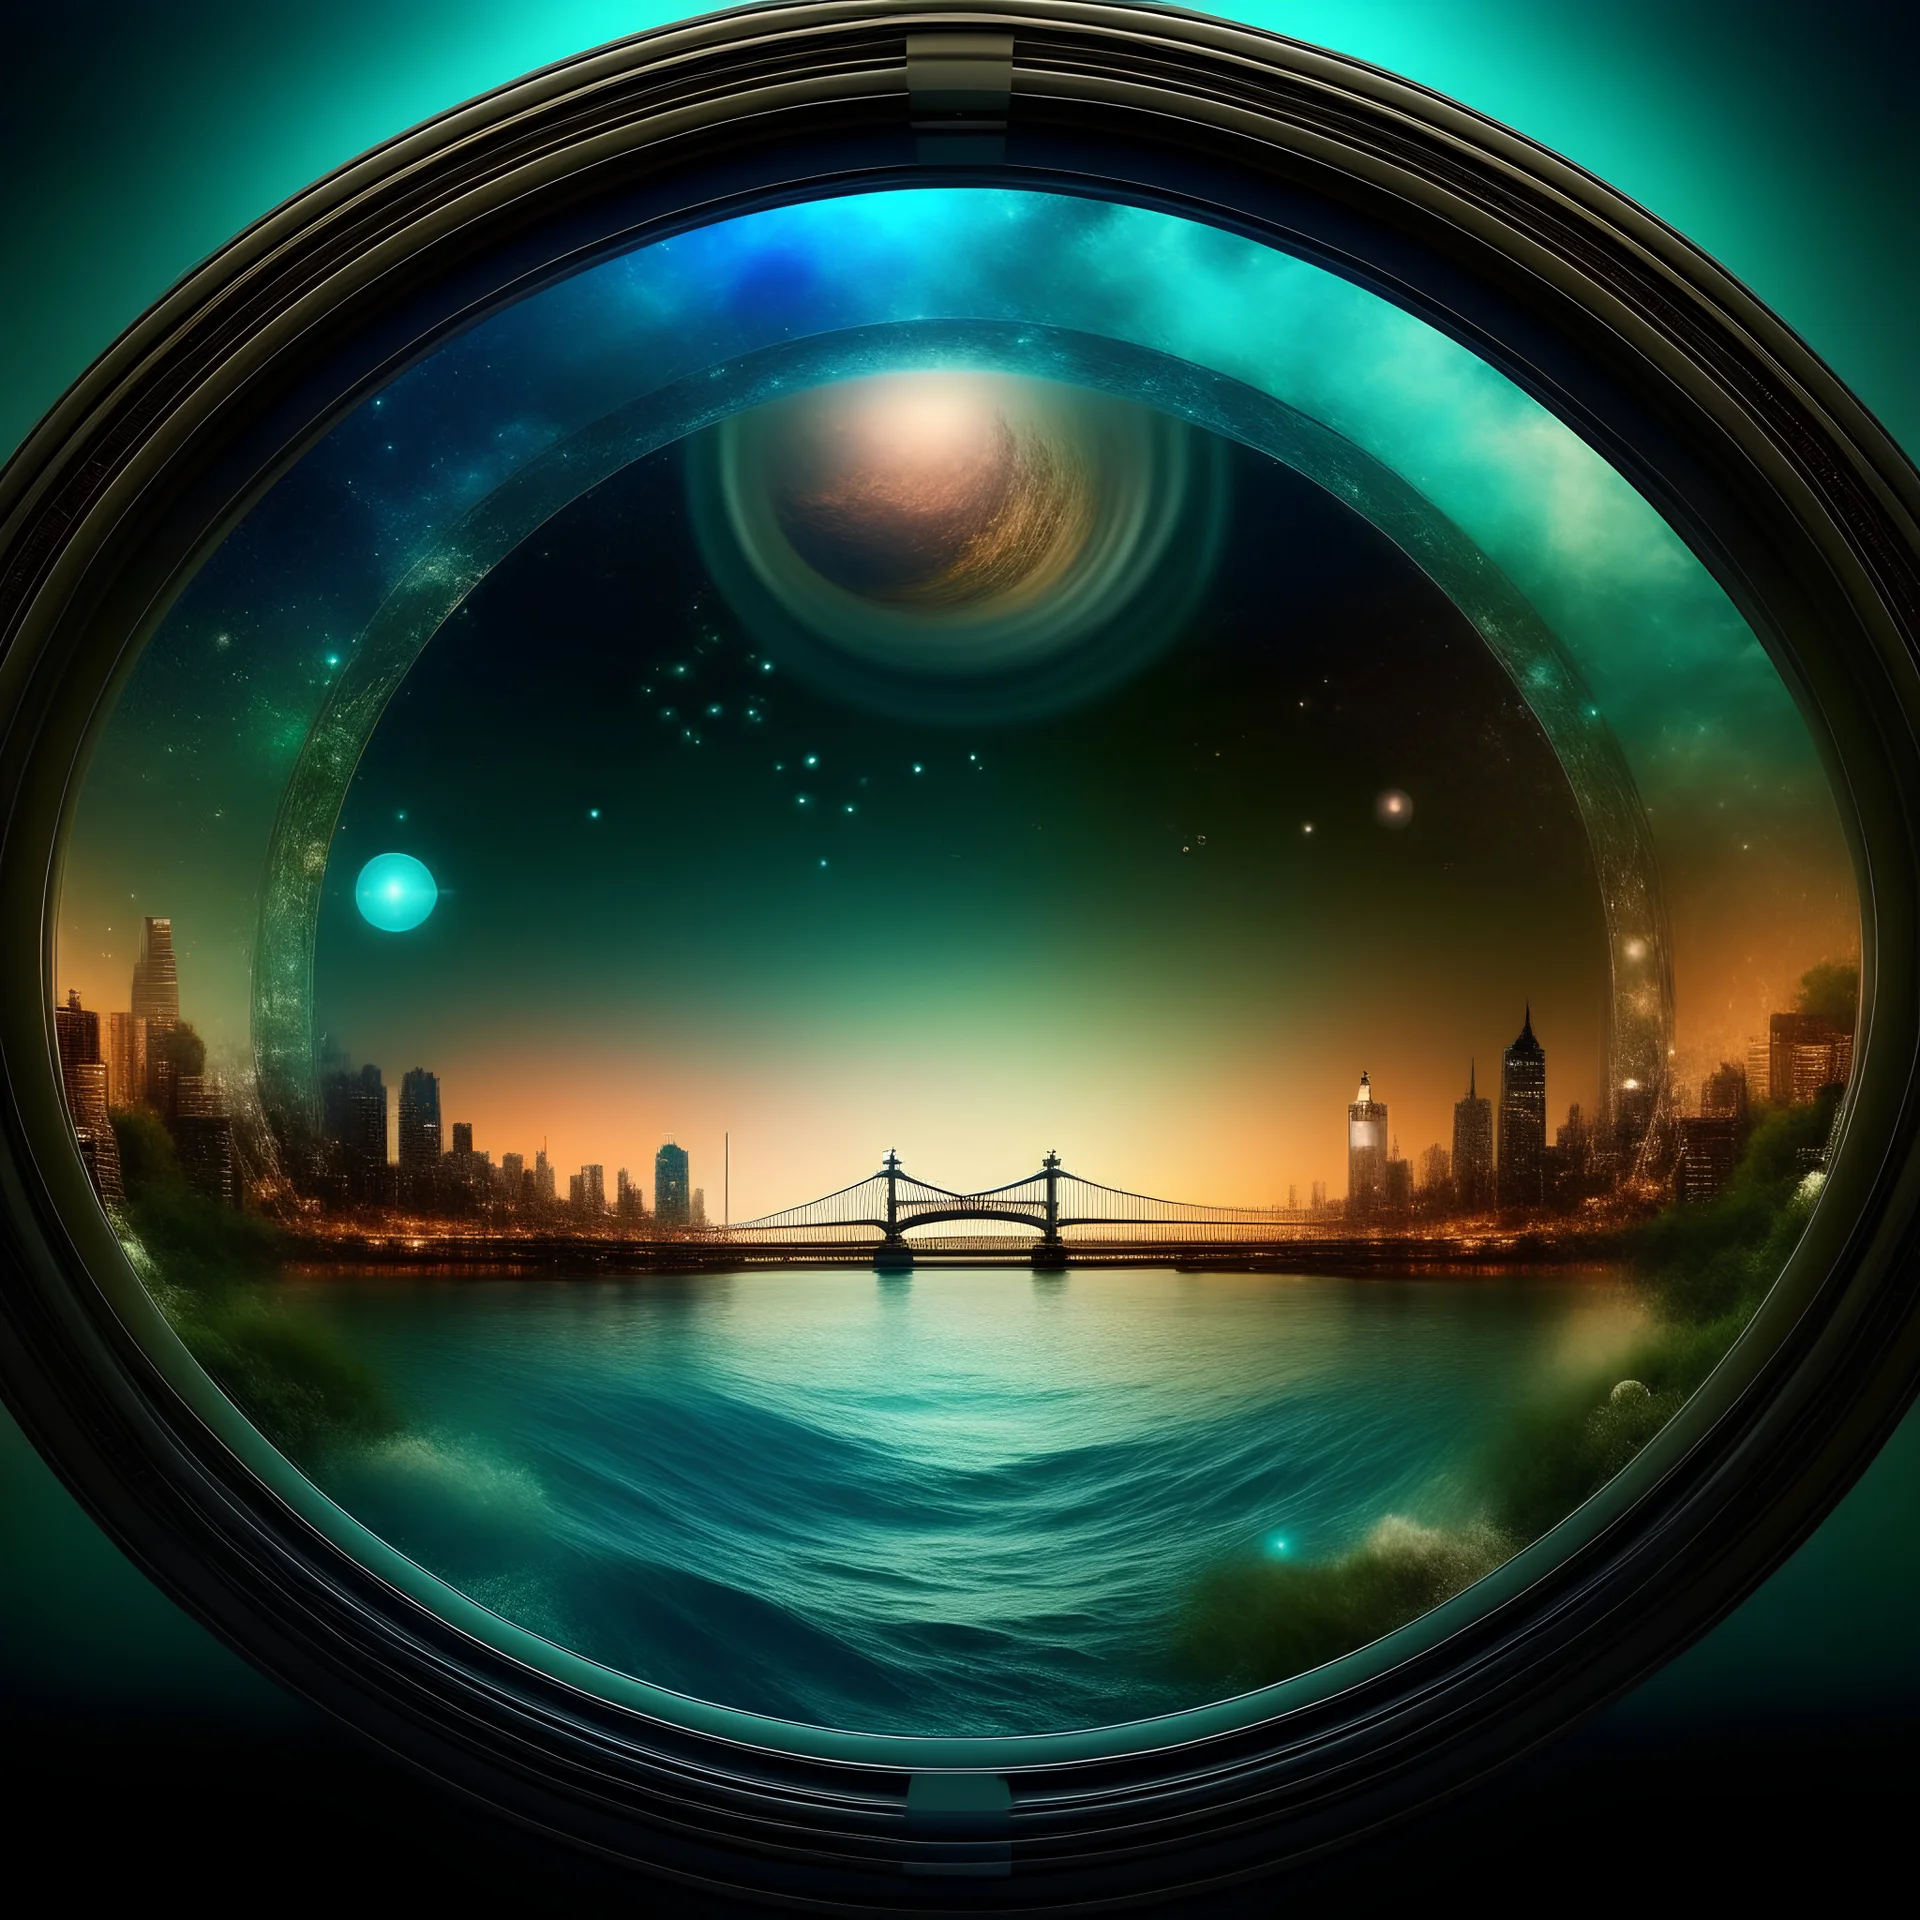 circular picture frame, scene of galaxy and waves, bottom half underwater, top half out of water, showing the sky and city skyline with a large bridge, planets, the great unknown, bridge